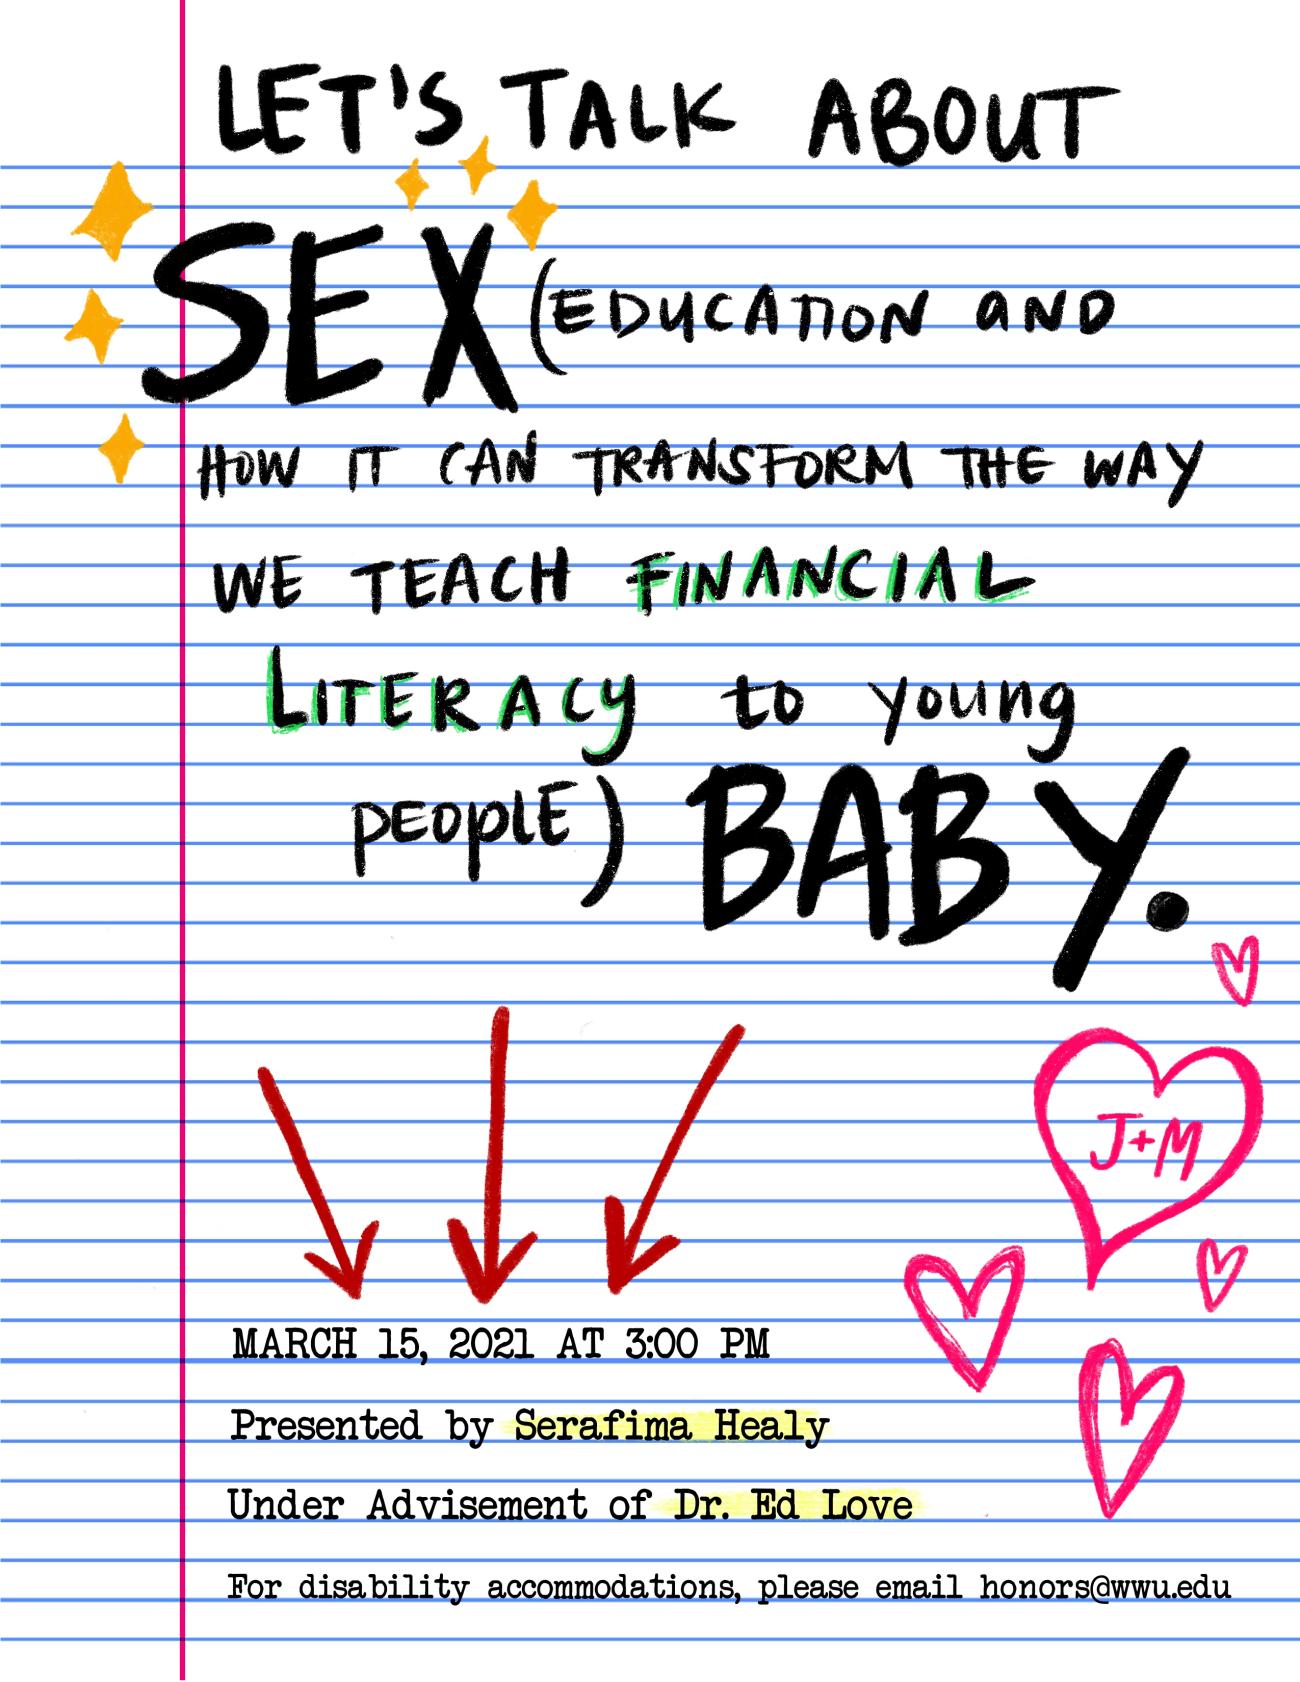 Text: "Let's Talk About Sex (education and how it can transform the way we teach financial literacy to young people) Baby. March 15, 2021 at 3:00 pm. Presented by Serafima Healey. Under Advisement of Dr. Ed Love. For disability acommodations please email honors@wwu.edu". Background image: a lined piece of paper with hand drawn doodles of arrows pointing to text, stars around the word "sex," and a heart with initials J & M, resembling a middle school note.